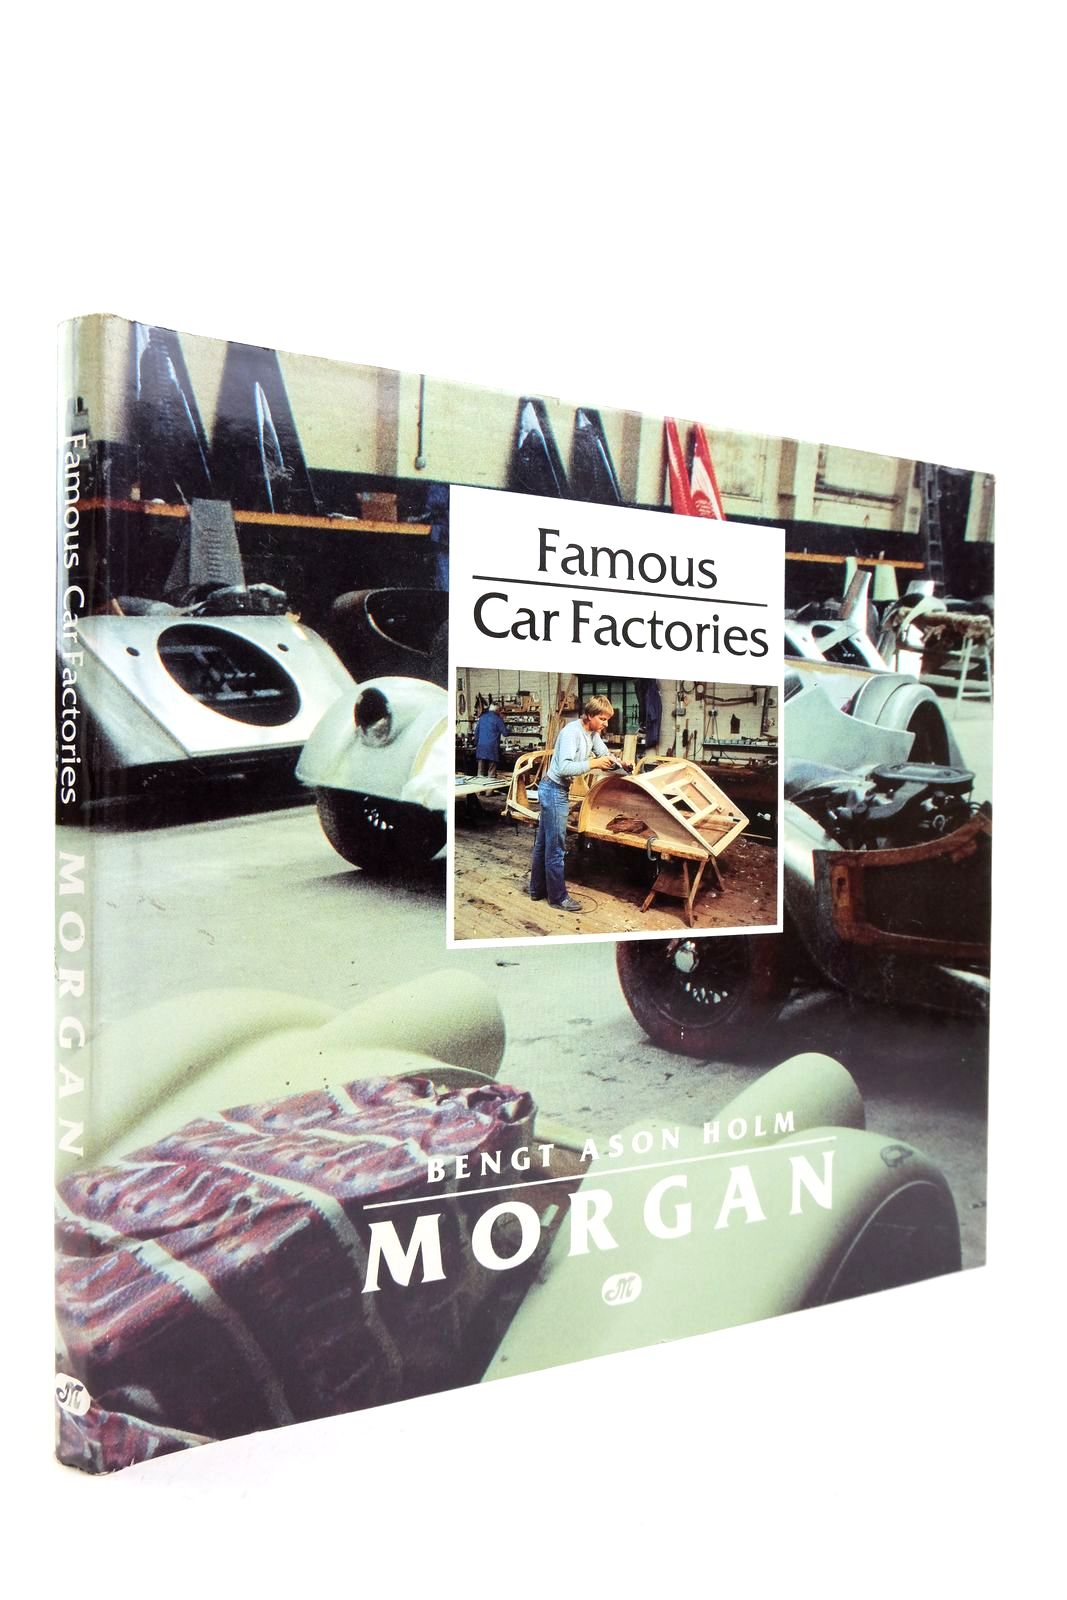 Photo of FAMOUS CAR FACTORIES: MORGAN written by Holm, Bengt Ason published by Motorbooks International (STOCK CODE: 2139384)  for sale by Stella & Rose's Books